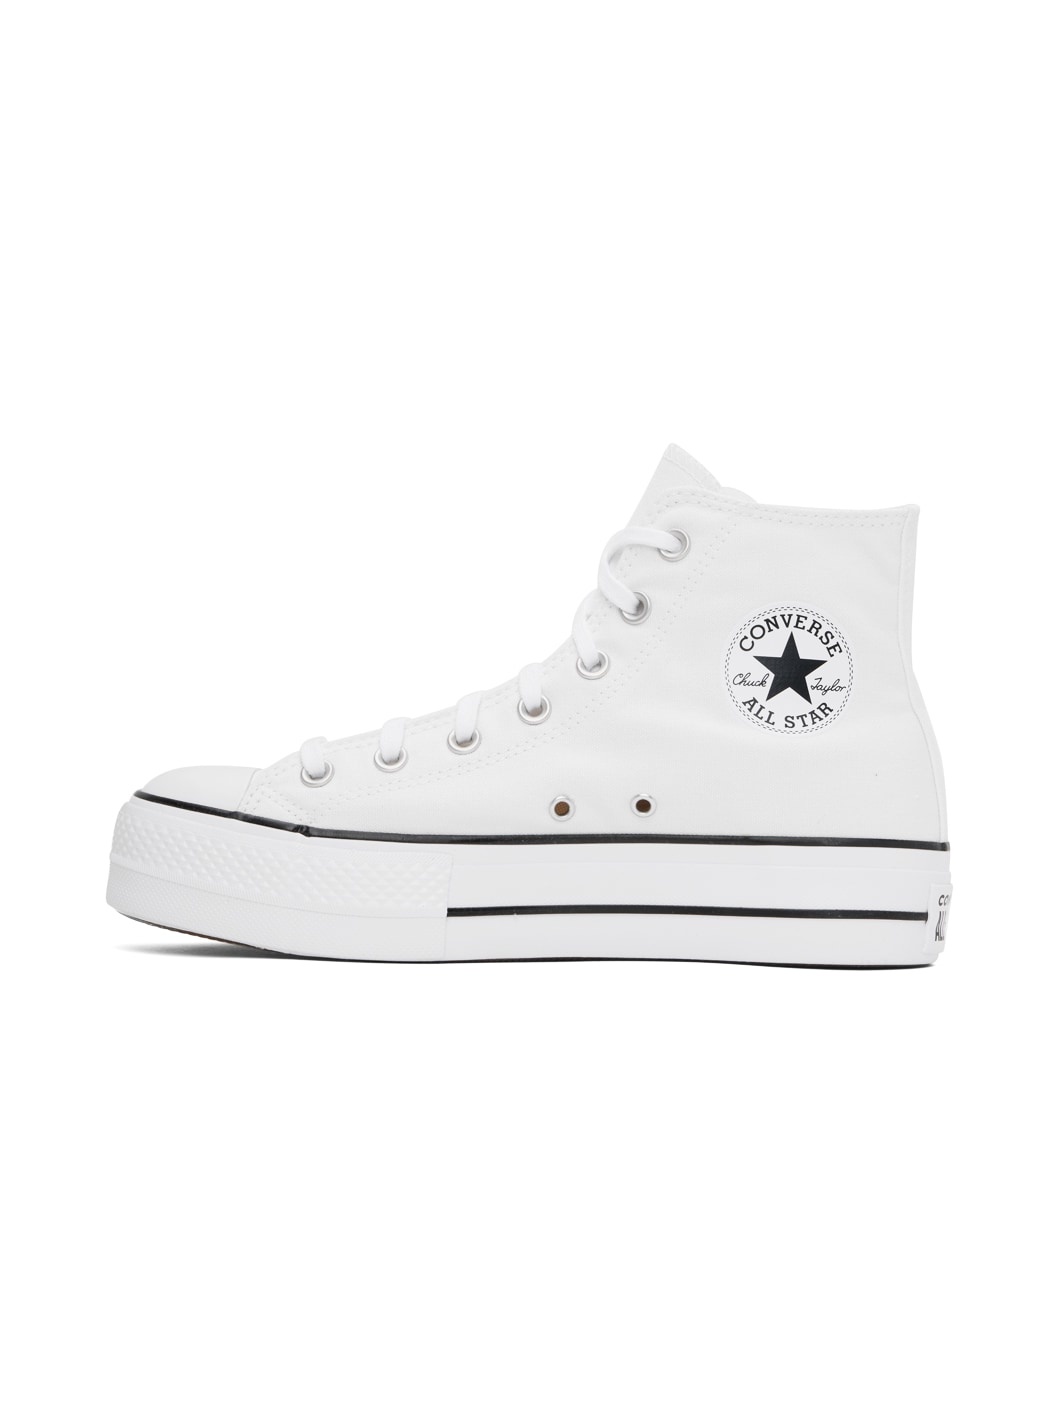 White Chuck Taylor All Star Platform Sneakers - 3